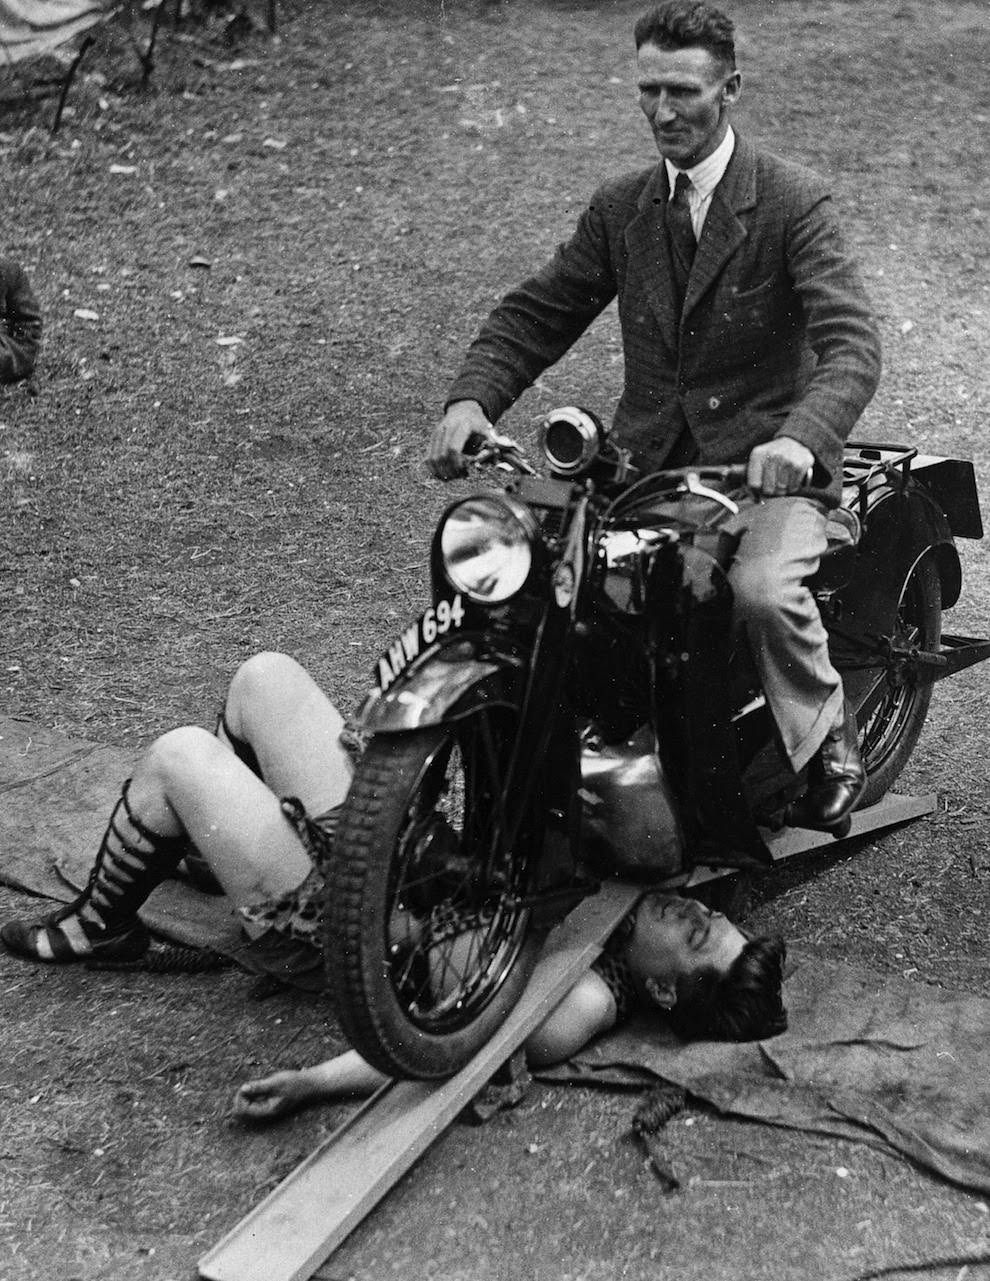 Samson Brown, the world’s strongest man, lets a motorcycle run over him, 1934